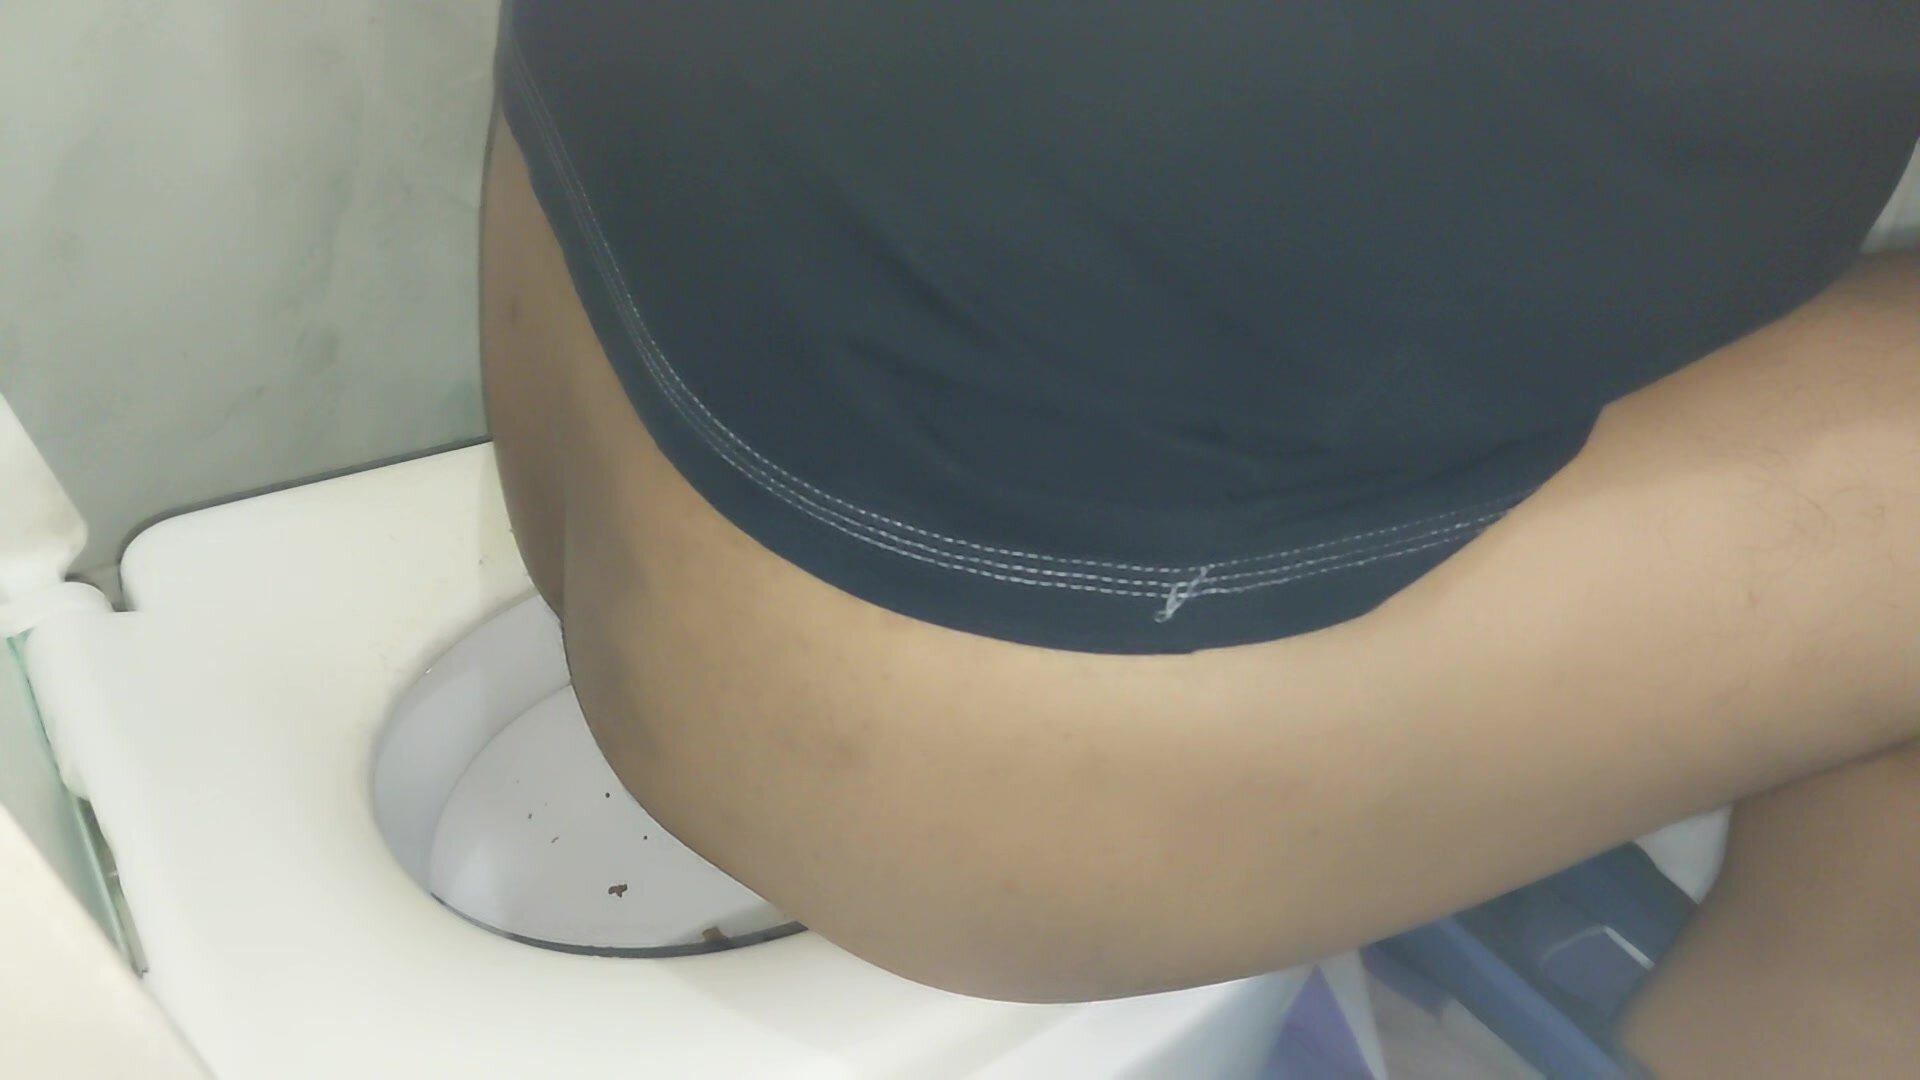 Toilet Pooping in a different filming angle